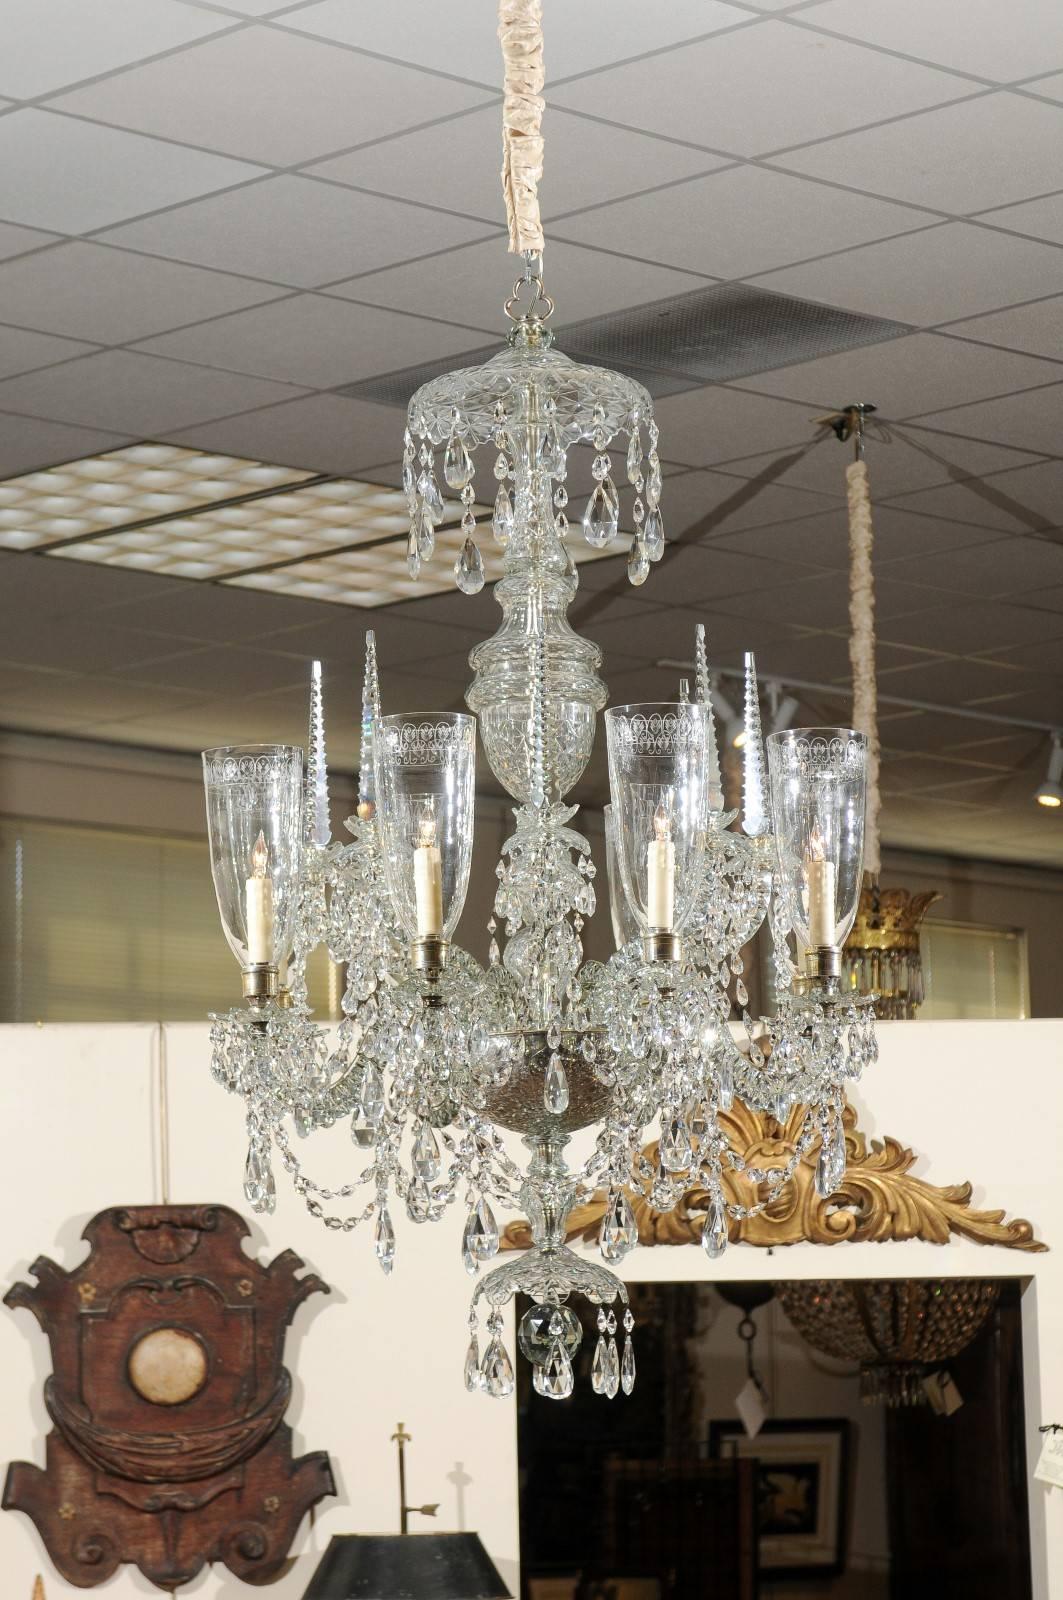 Waterford crystal chandelier with eight (8) lights encased in etched crystal shades, spires, and drop prisms, Ireland mid-19th century.